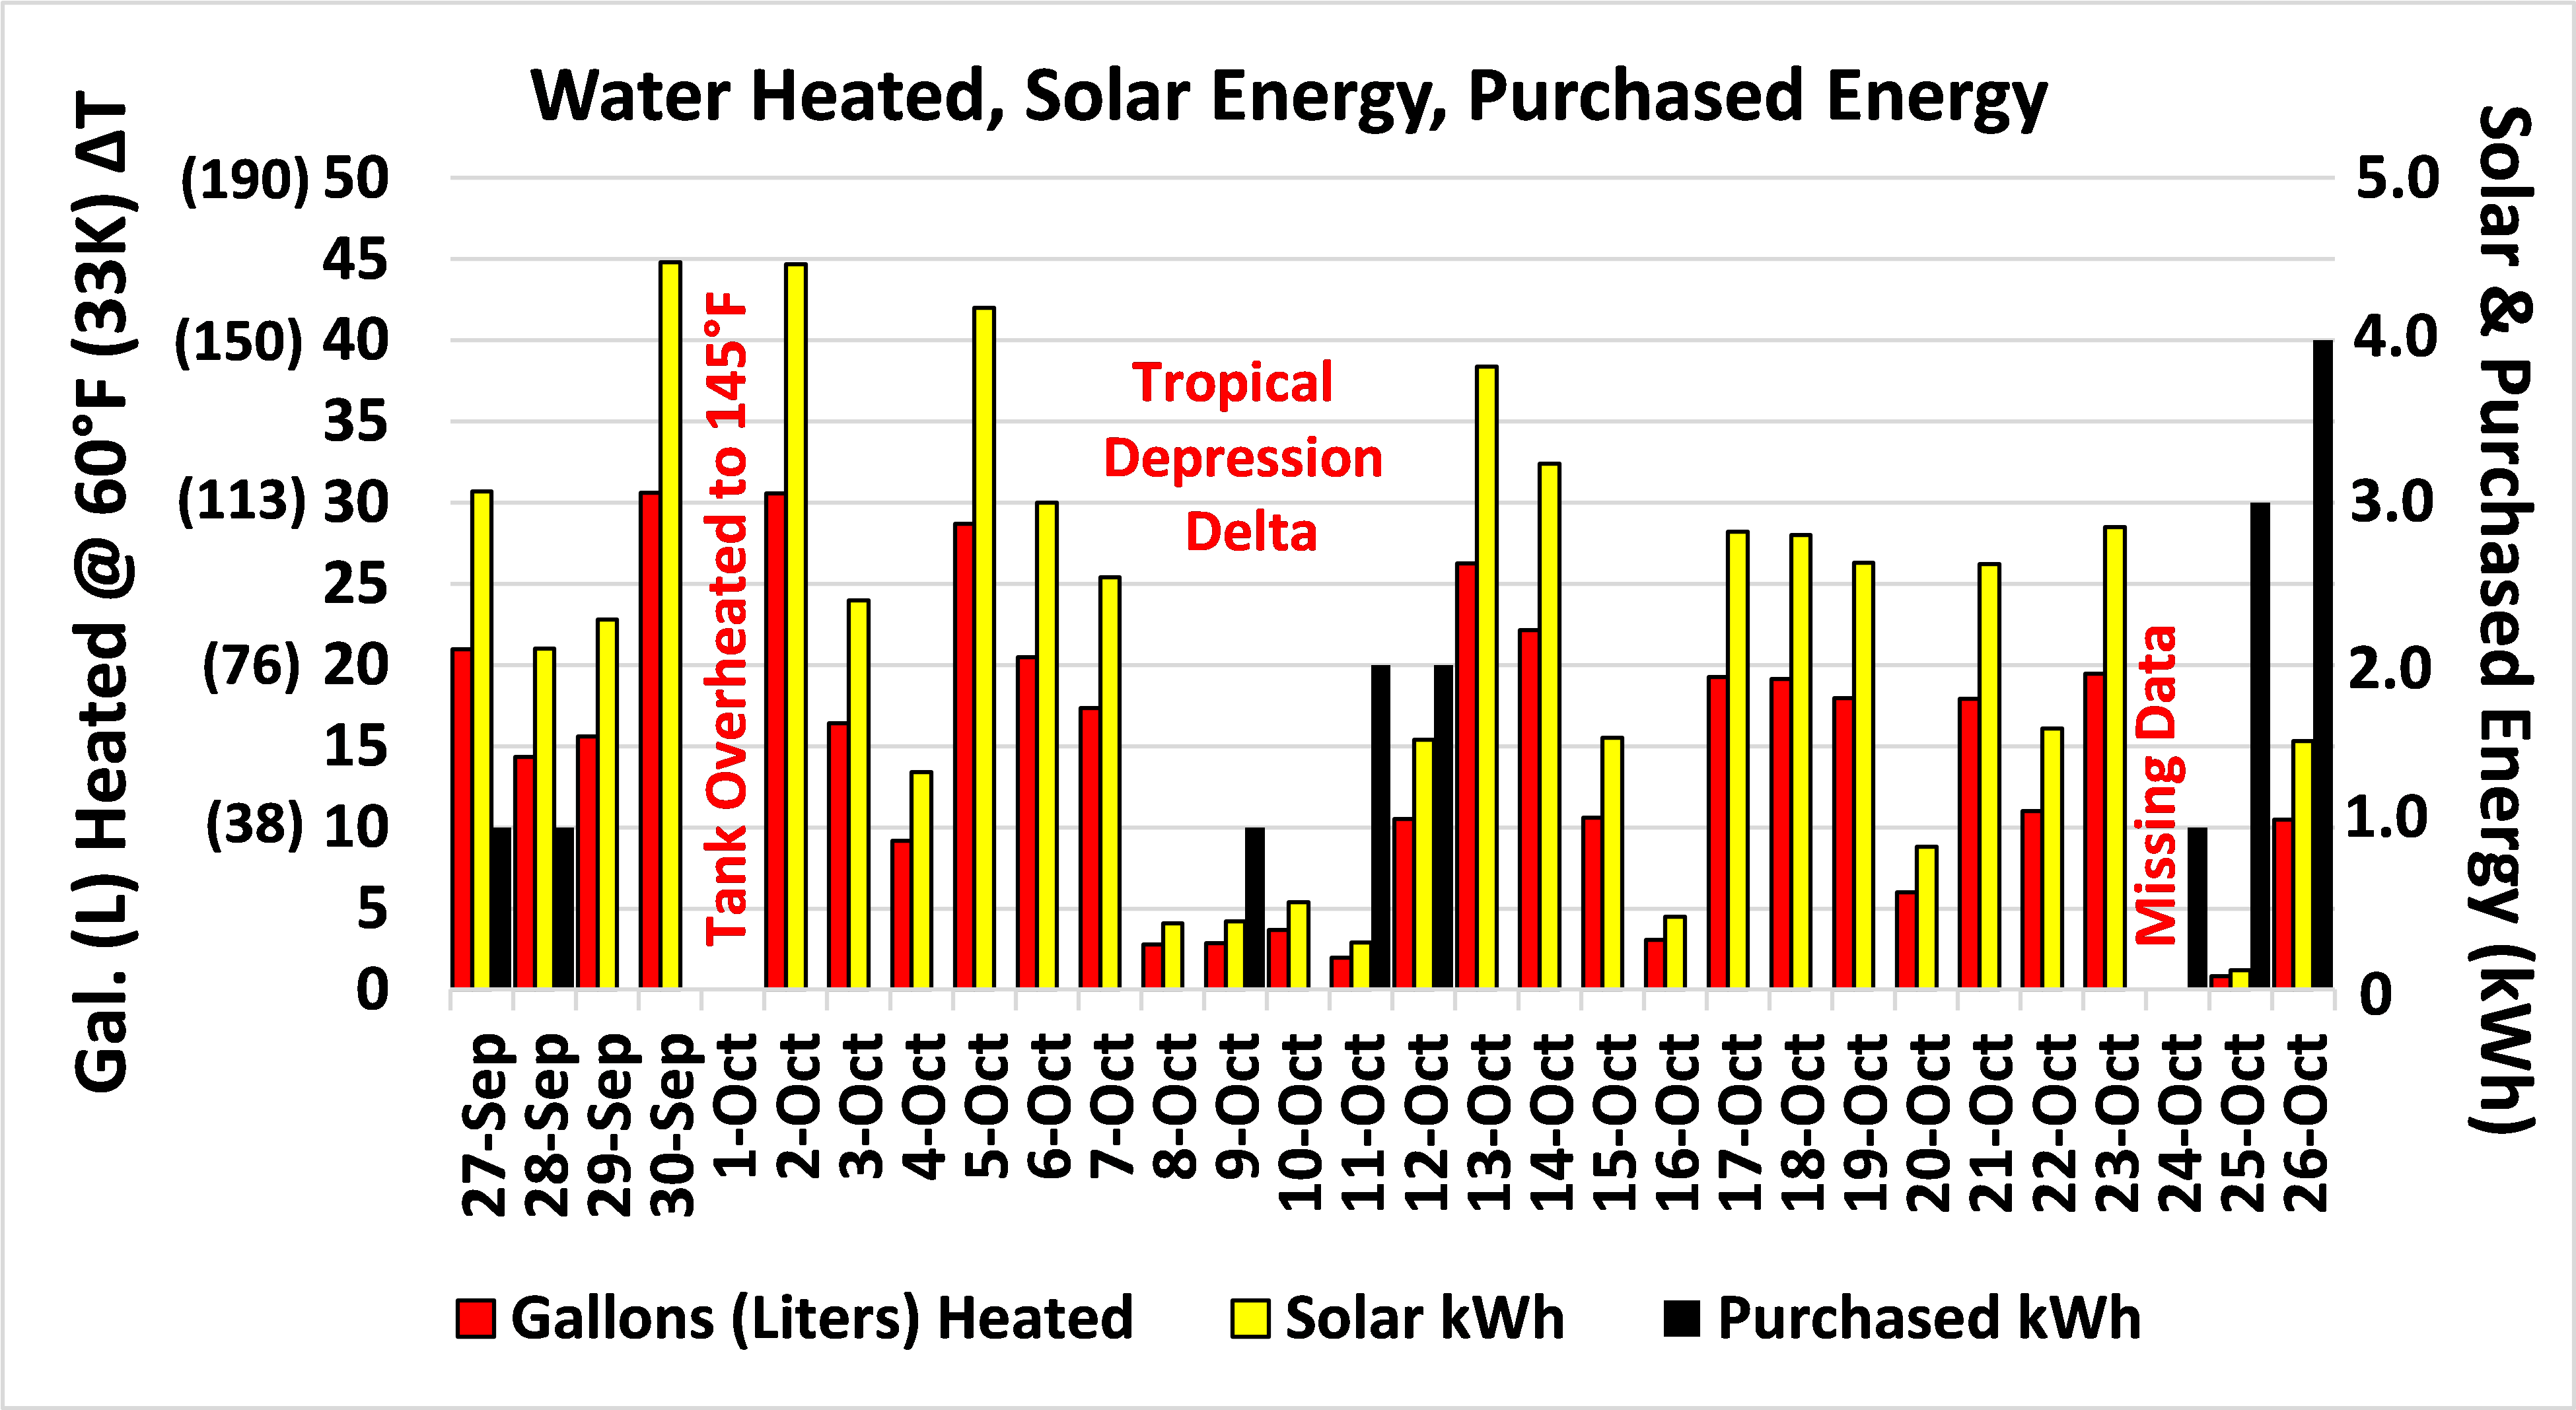 The volume of water heated, solar energy collected, and energy purchased for the direct PV system